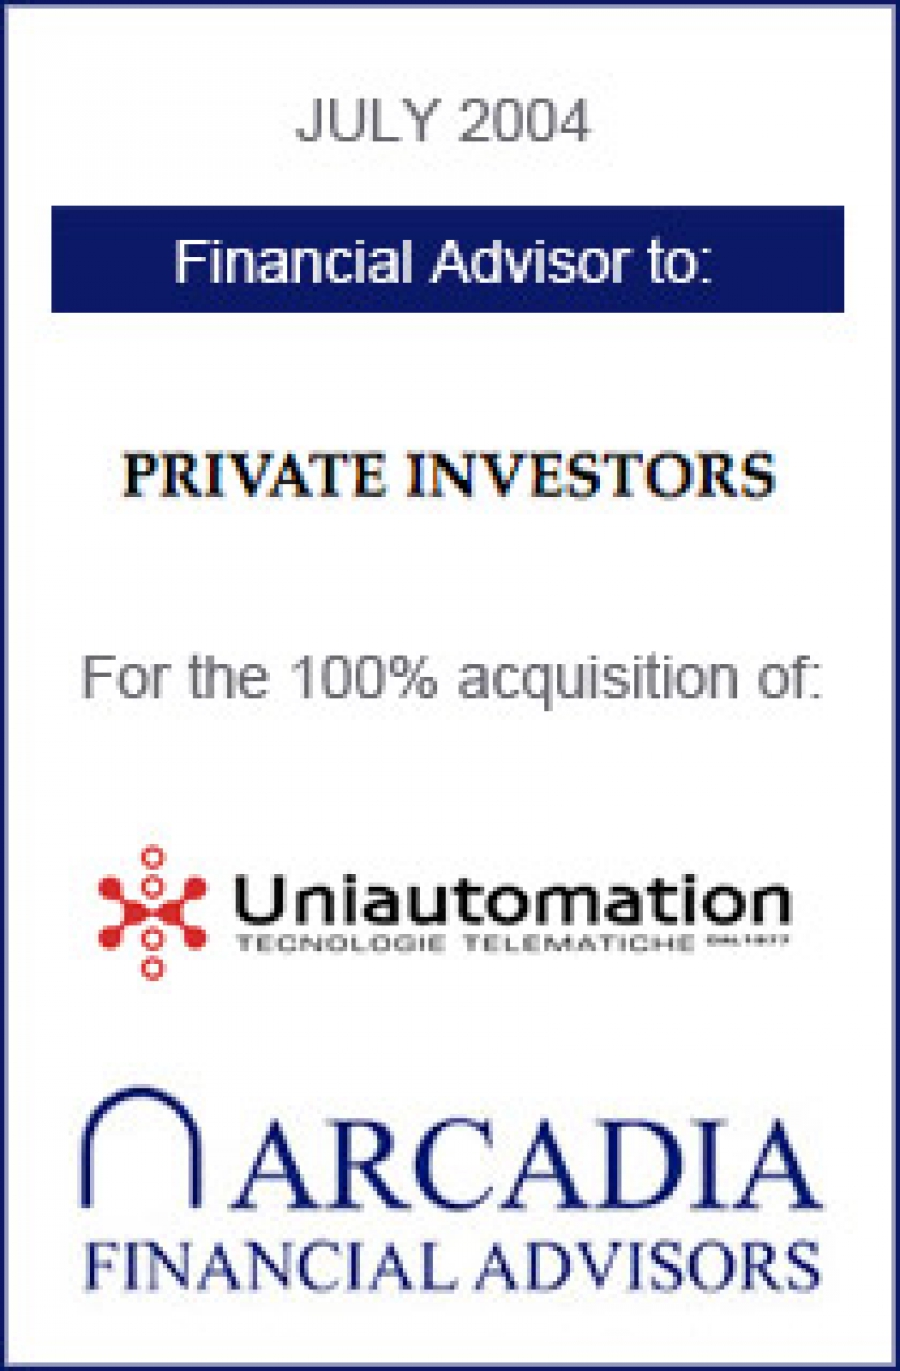 Transaction completed with Private Investors